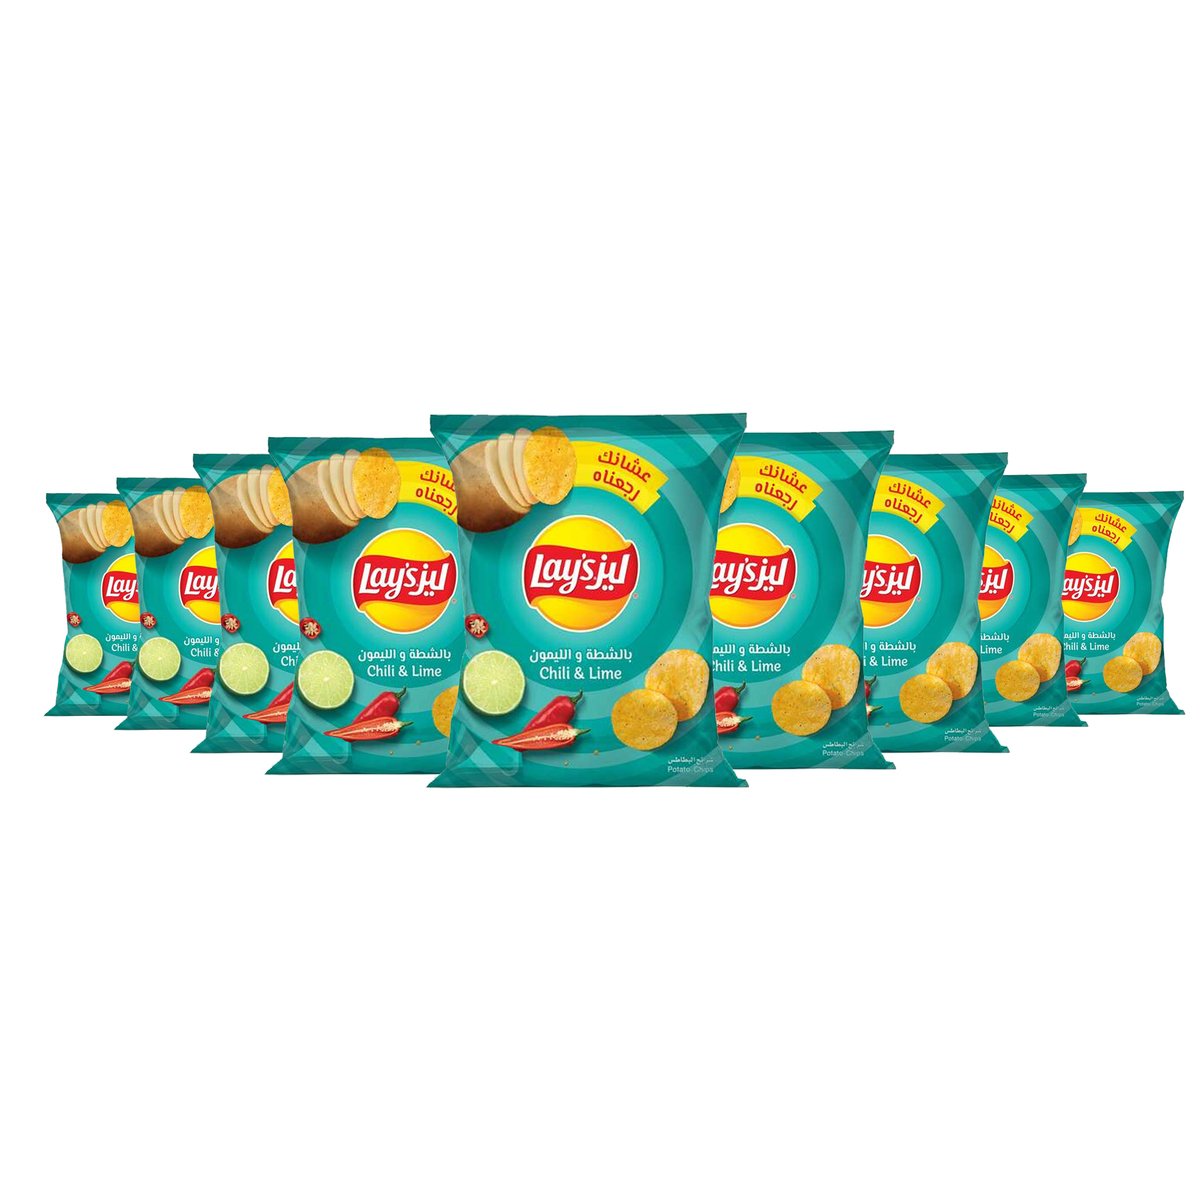 Lay's Potato Chips Chilli & Lime 14 x 23 g